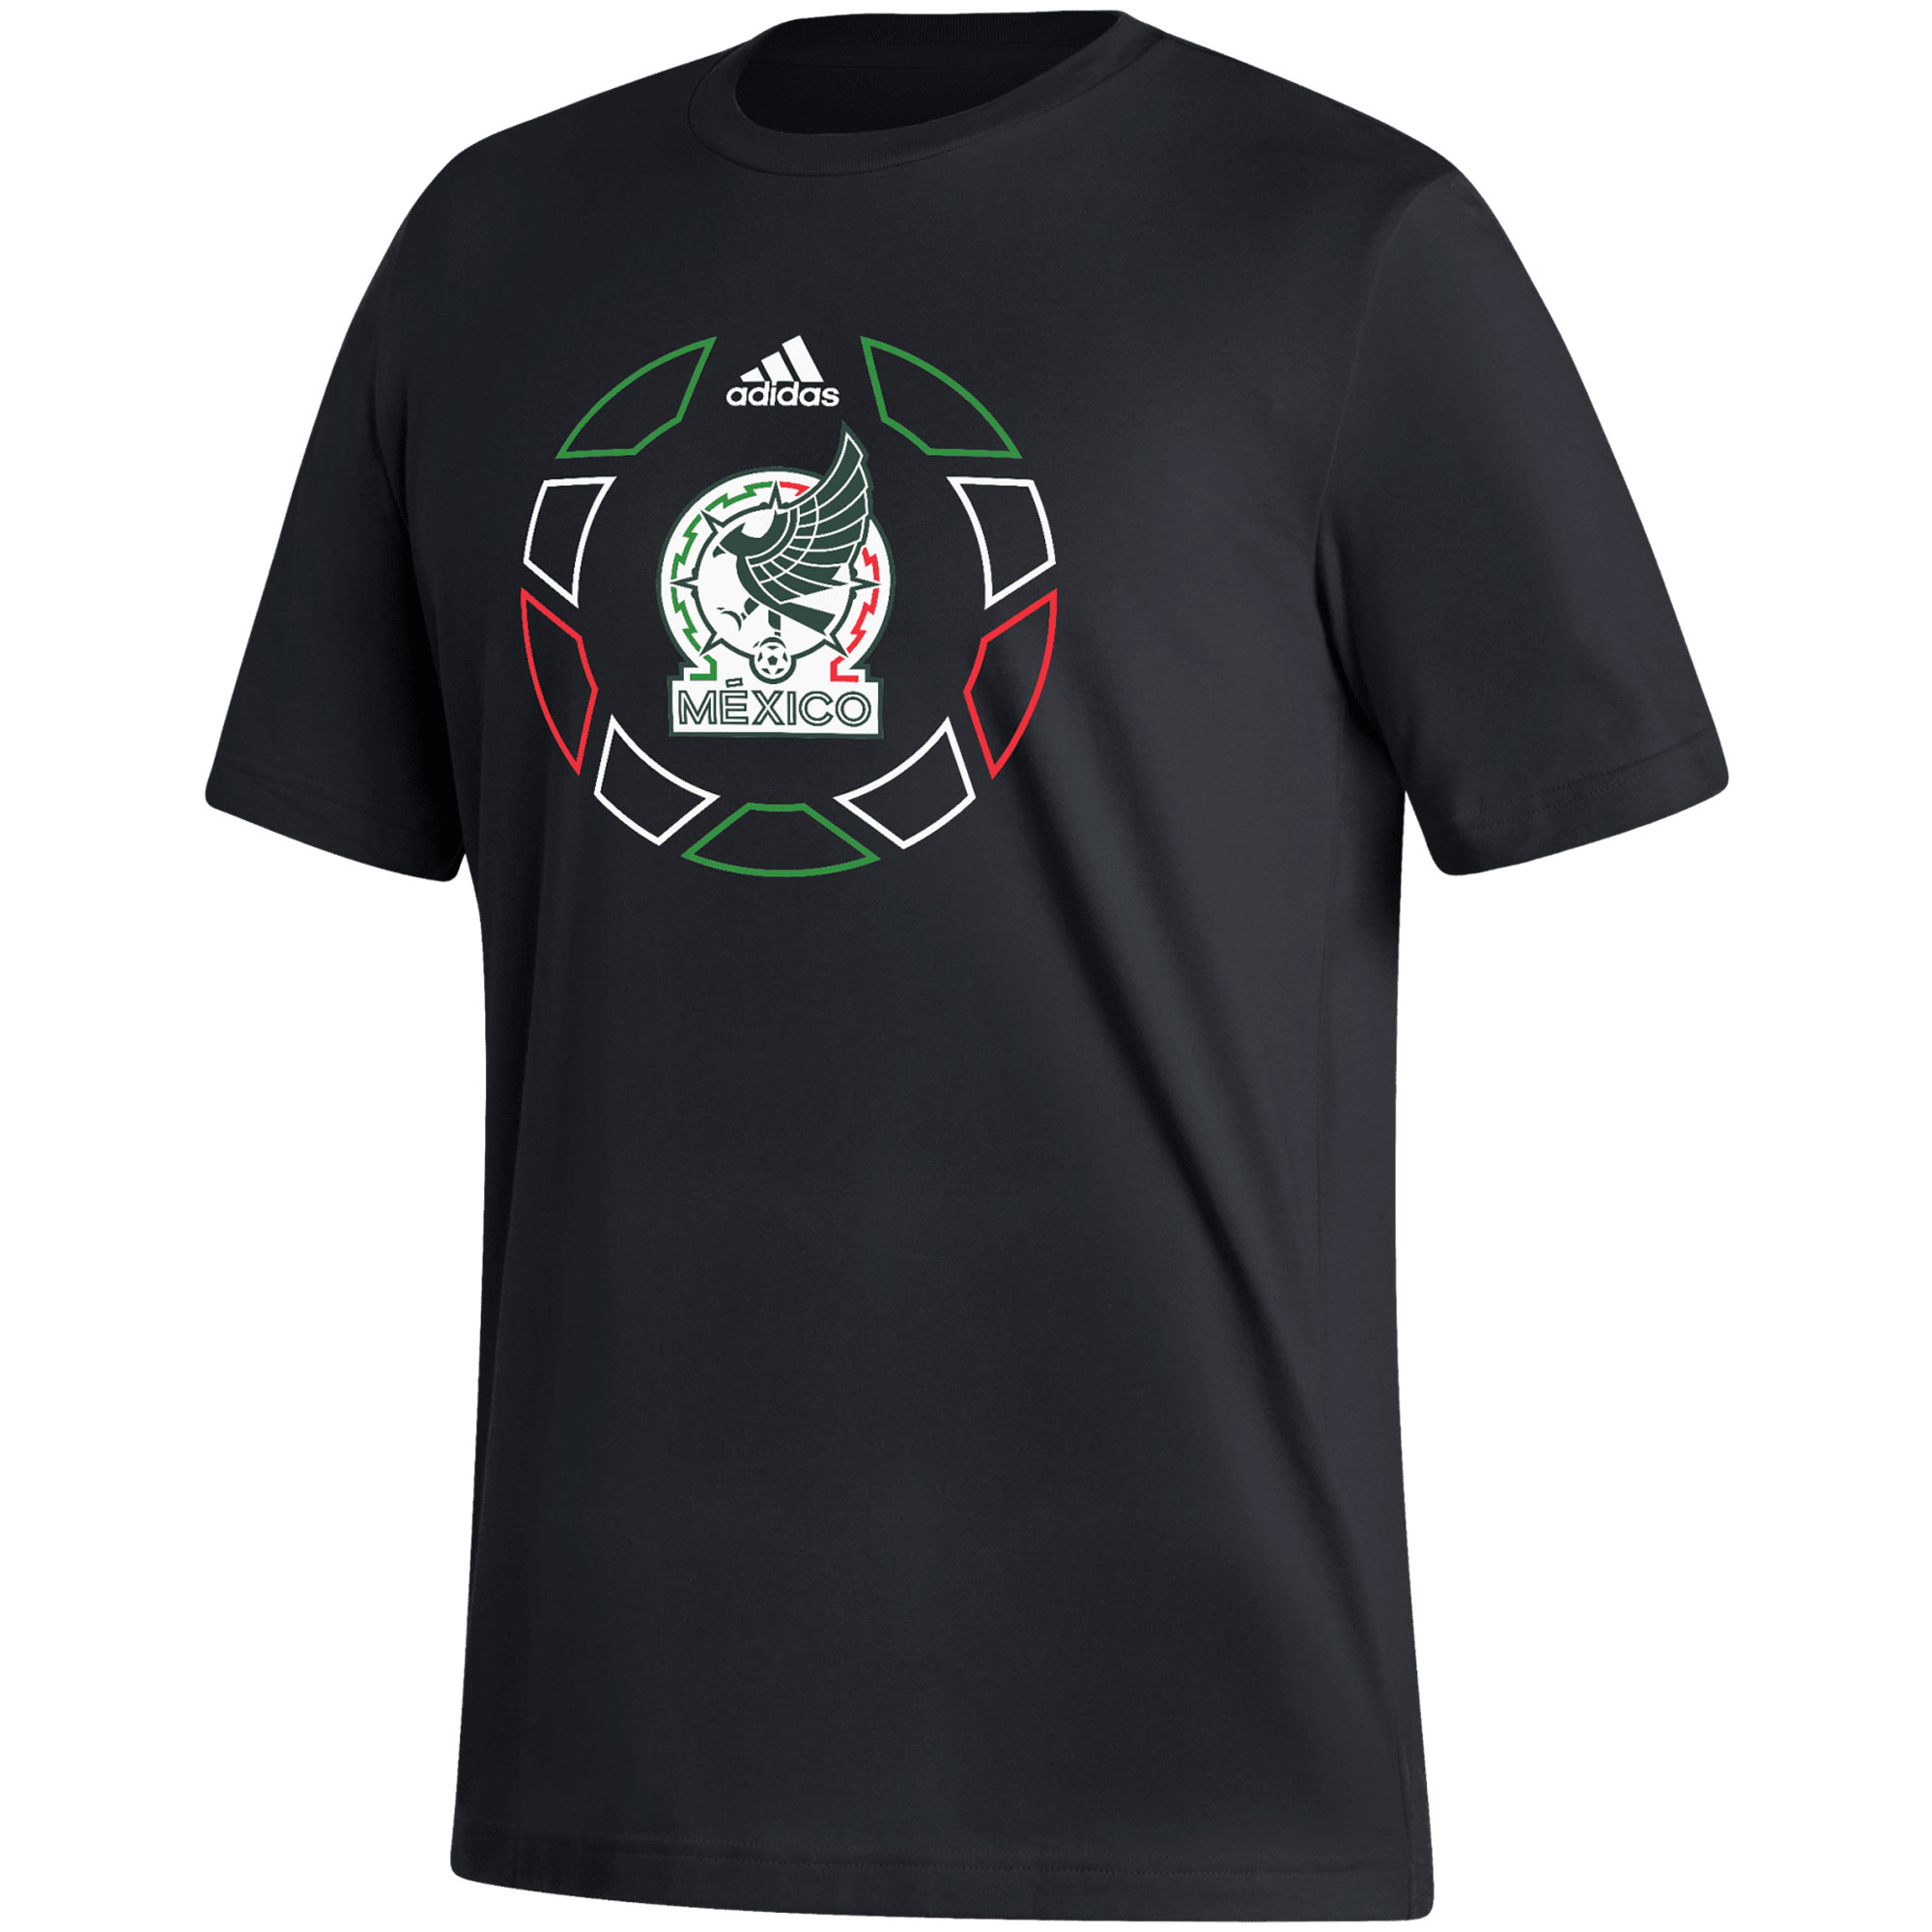 Women's adidas Black Mexico National Team Ultimate Lined Up Too climalite  V-Neck T-Shirt